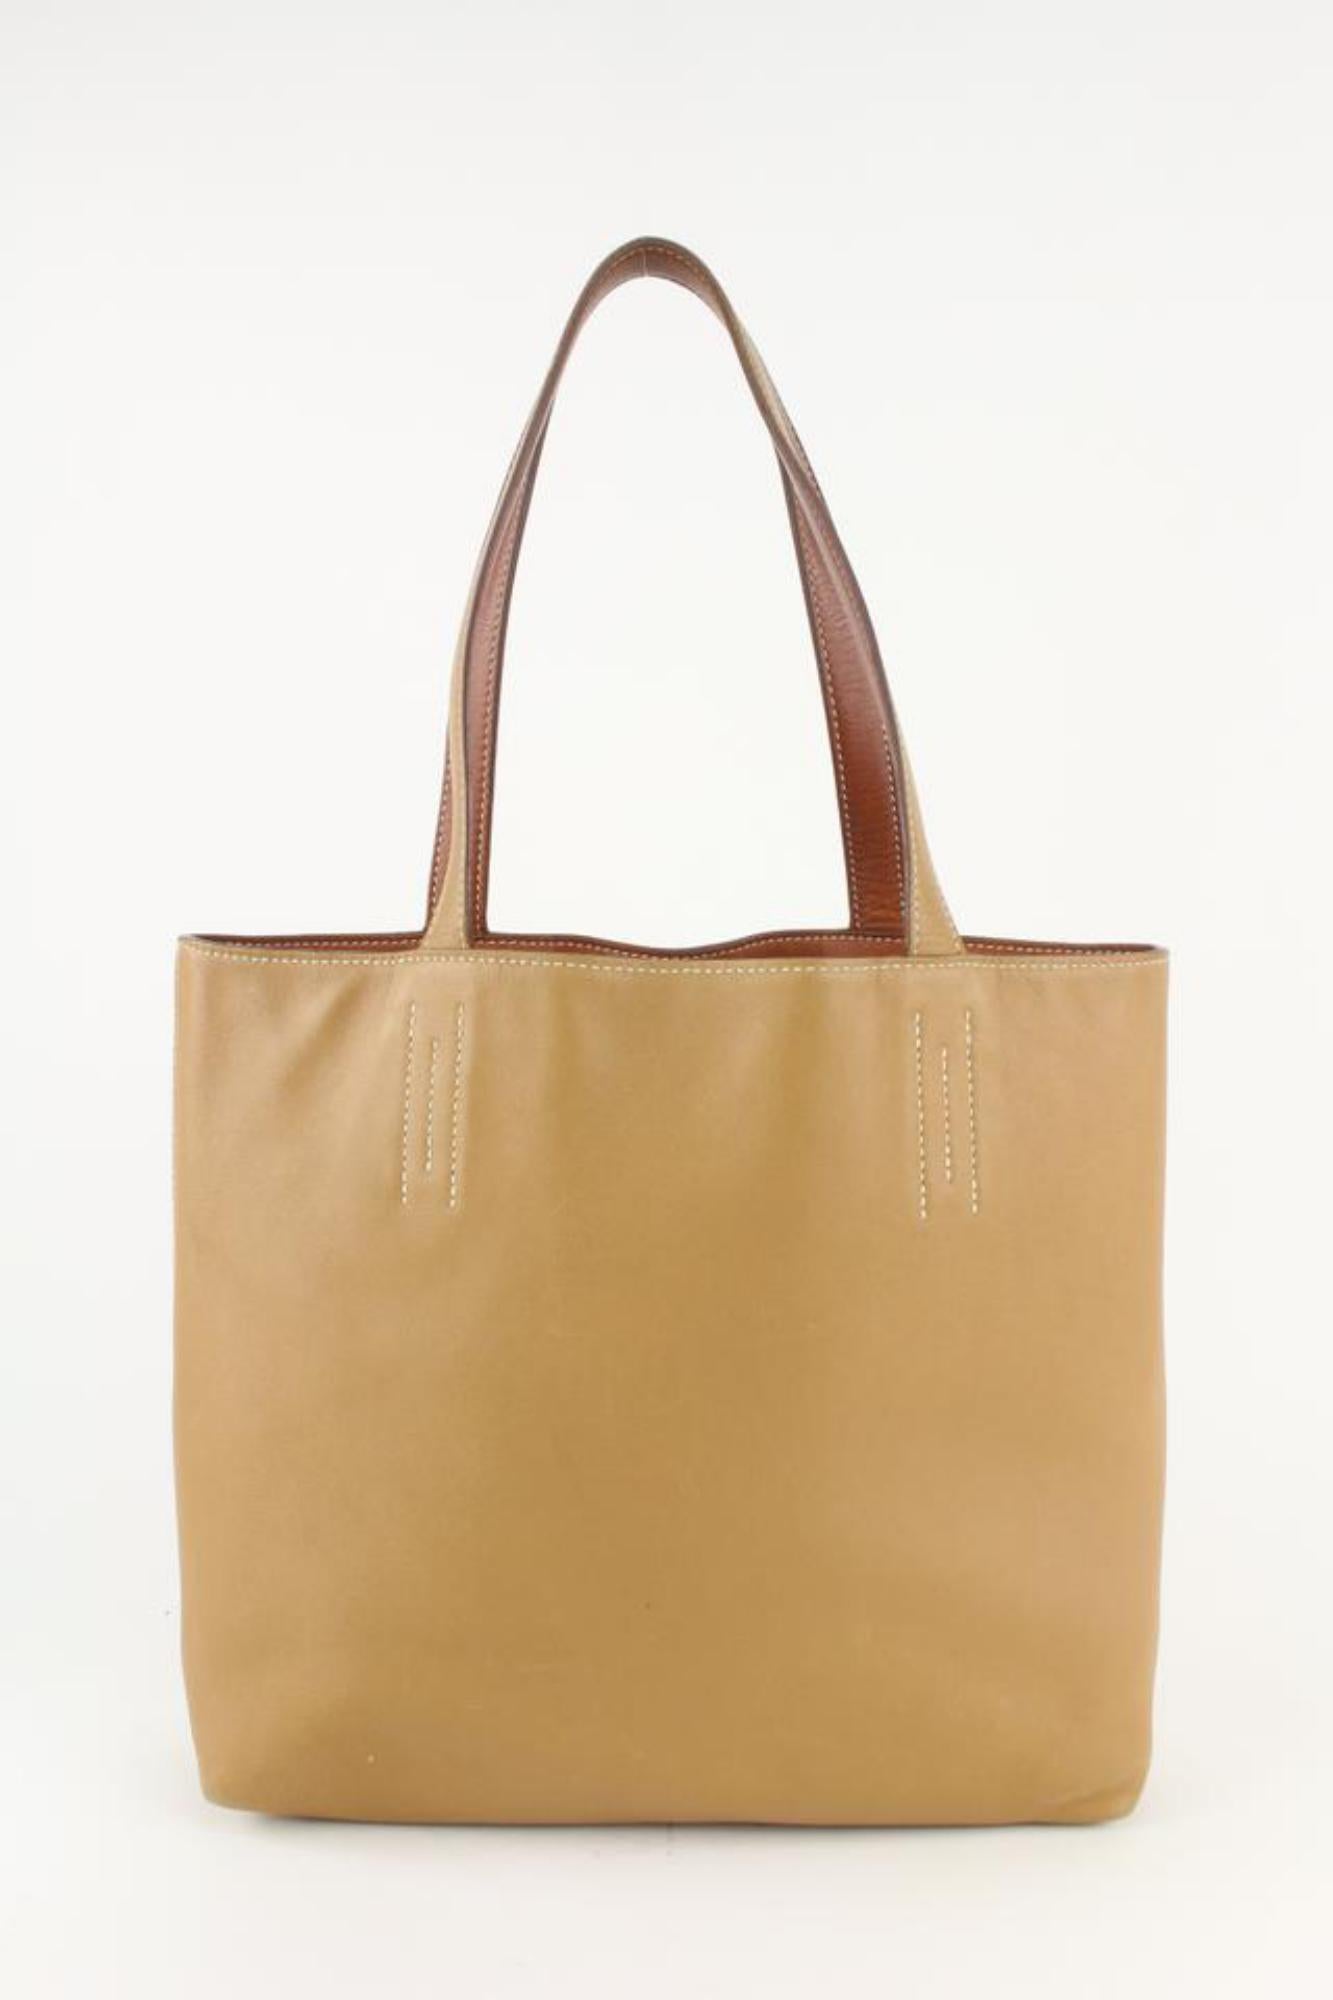 Hermès Brown x Gold Reversible Leather Double Sens 36 cm Tote 1111h43 For Sale 4